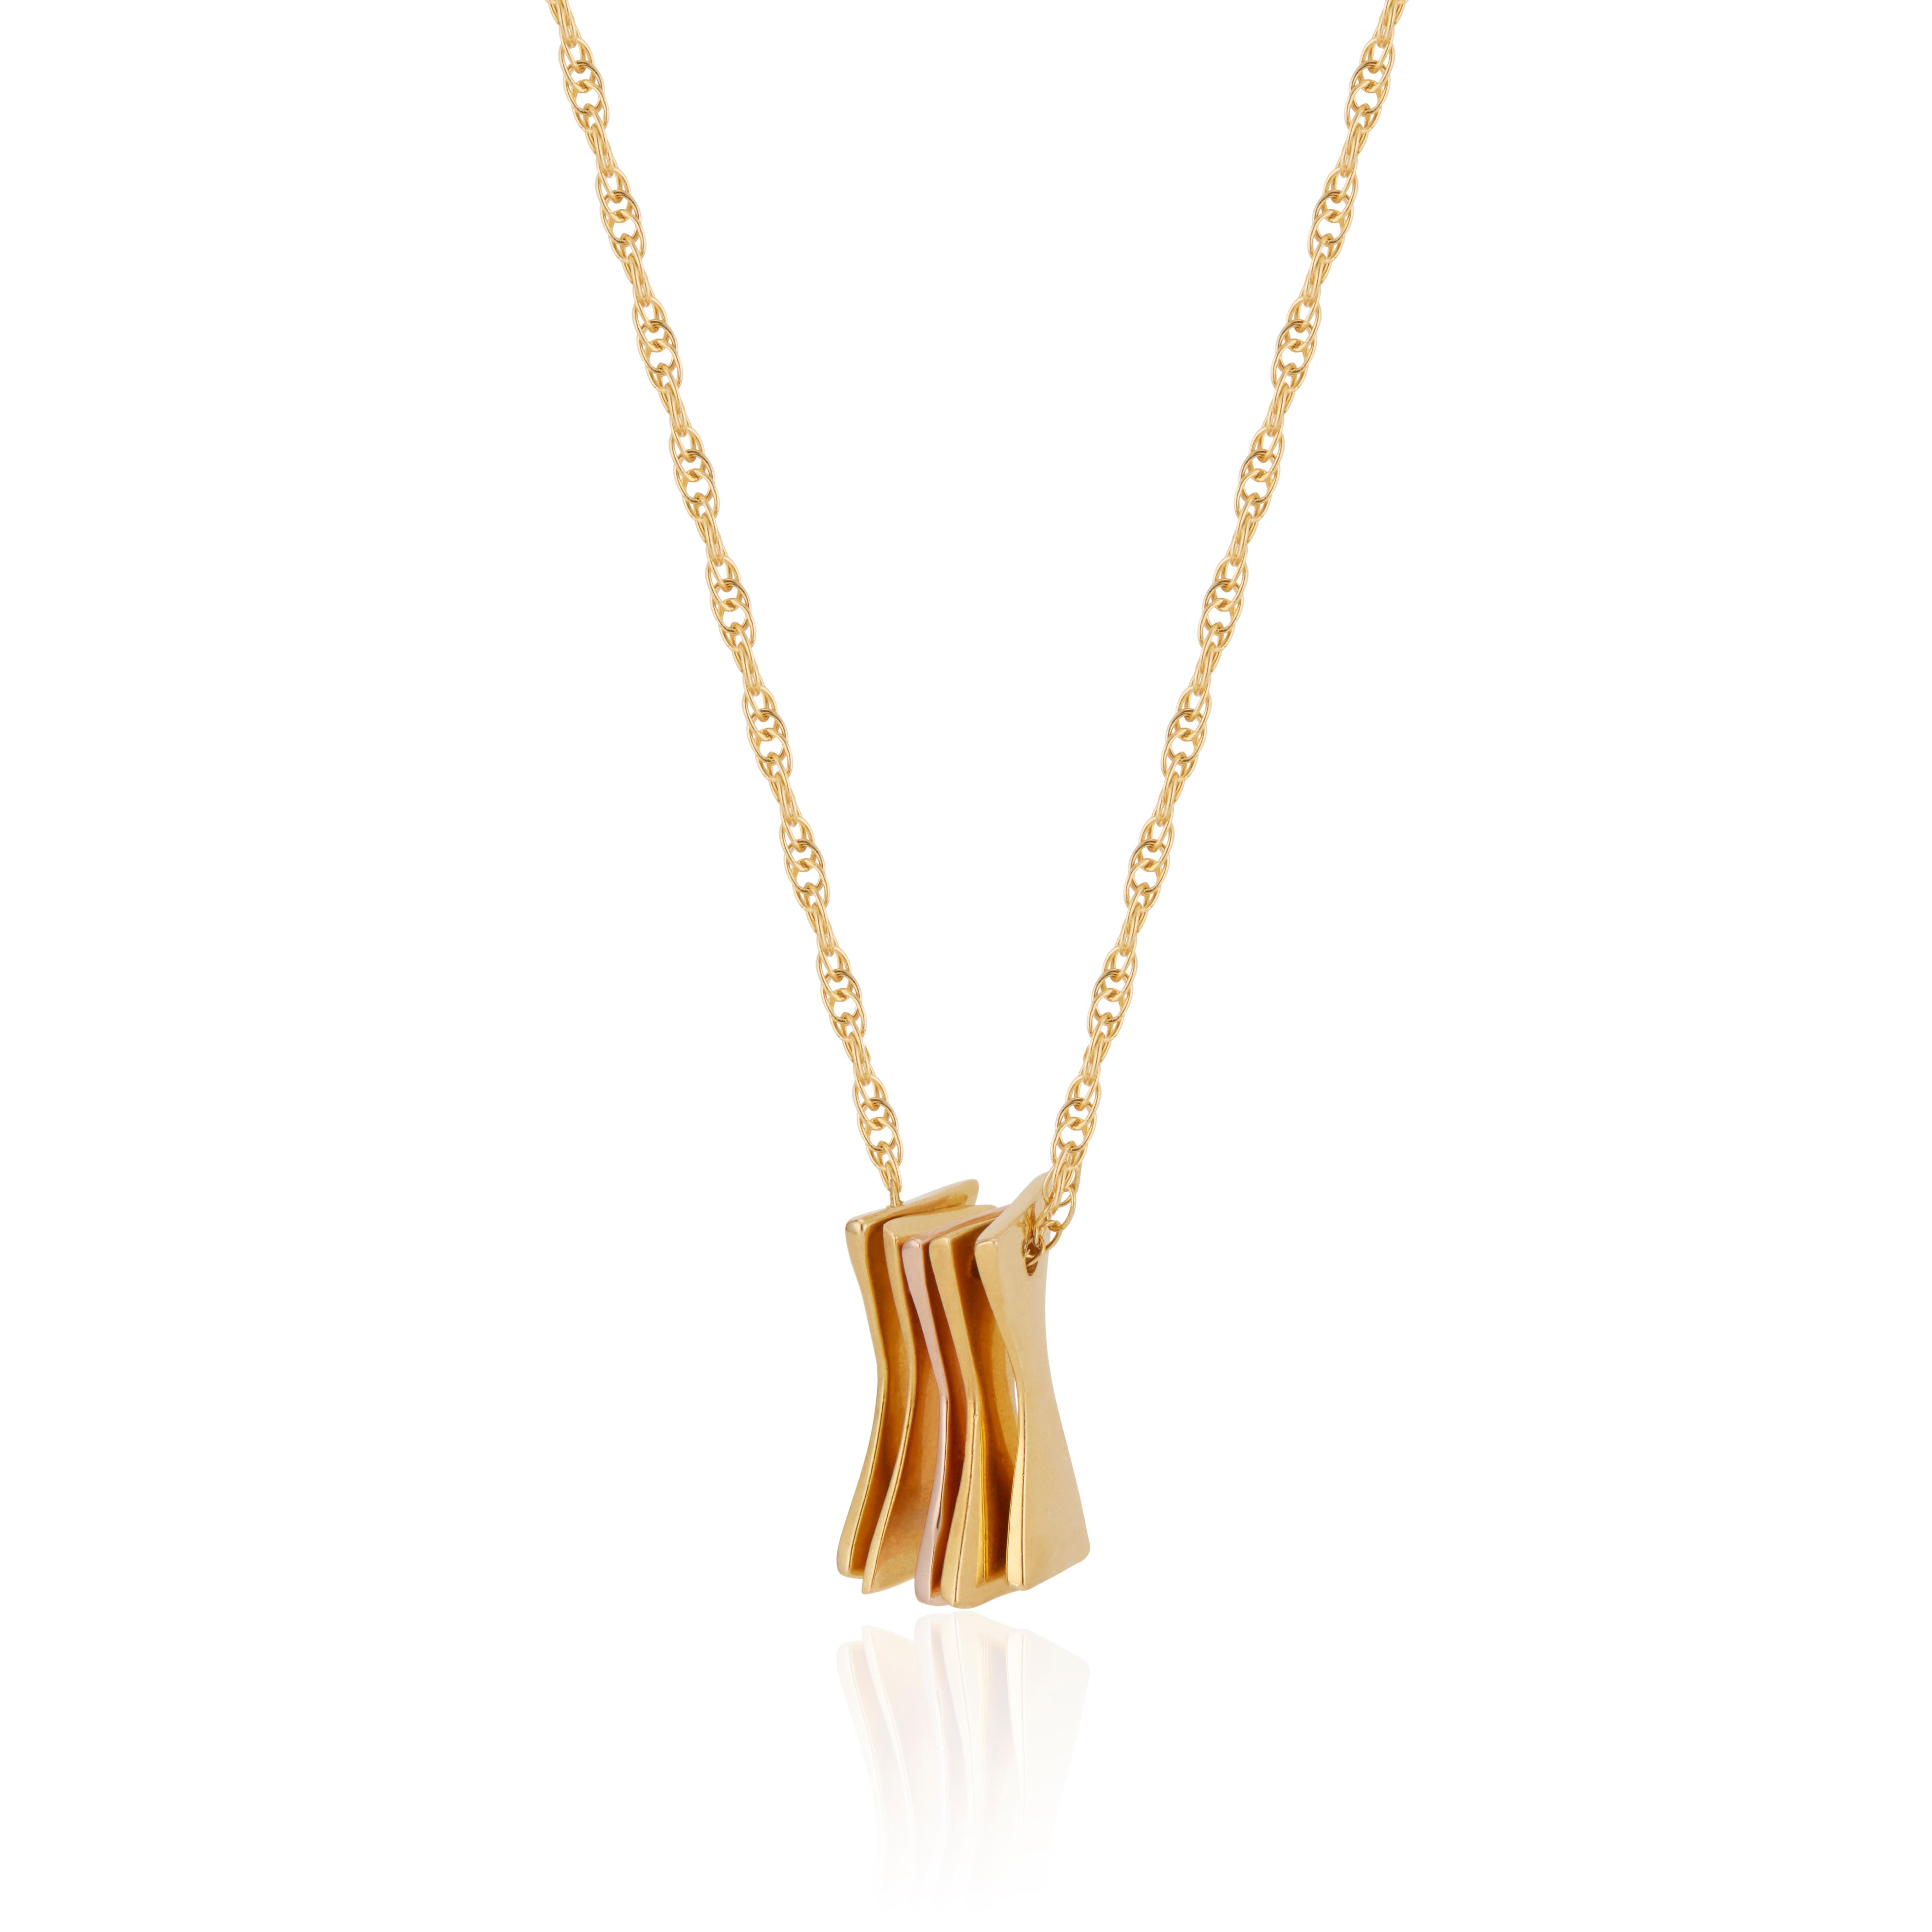 A beautiful and sleek design, with movement and flexibility.  A perfect everyday piece for the modern jewelry lover.  This 15/16-inch necklace is 22 Karat Yellow Gold Vermeil.

All items are made to order, please allow 10-15 business days for items